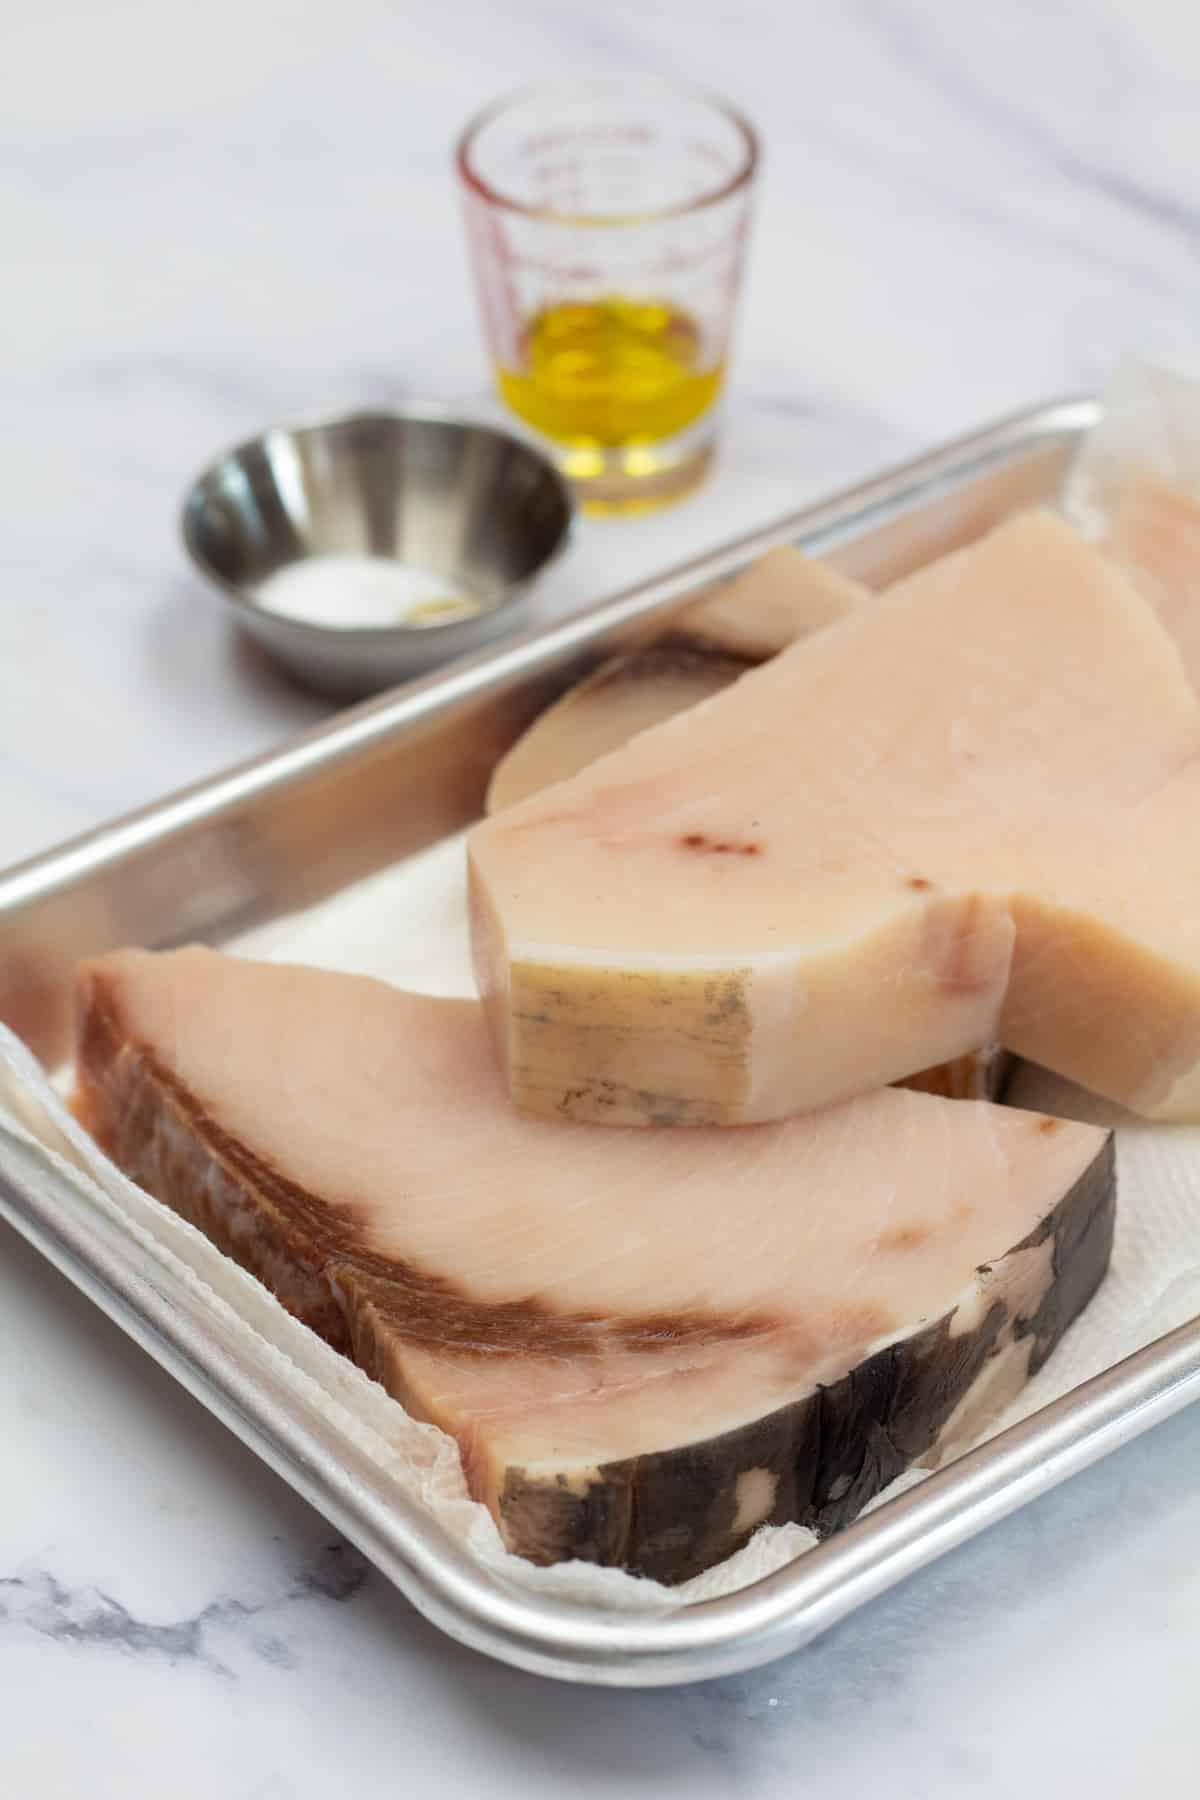 Photo showing ingredients for grilled swordfish.